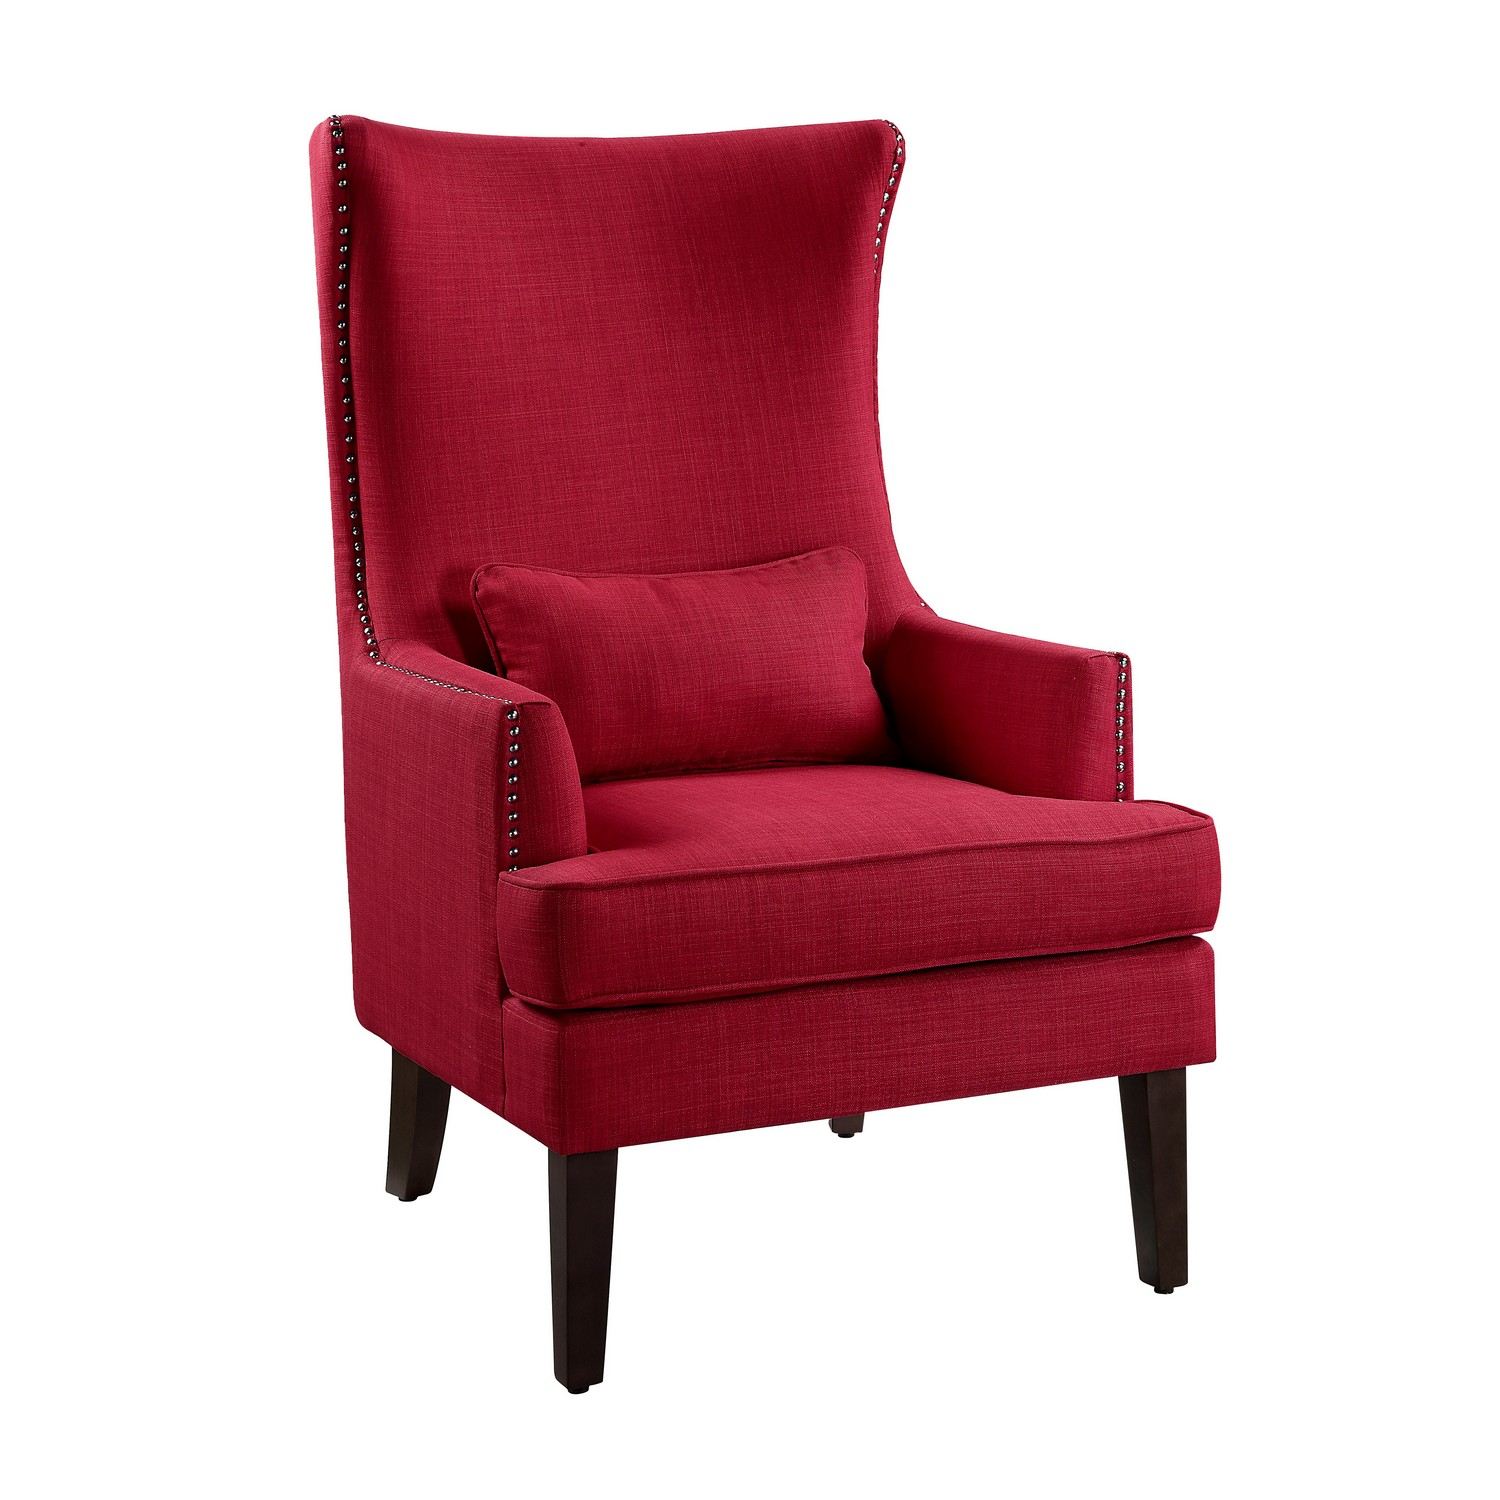 Homelegance Avina Accent Chair - Red